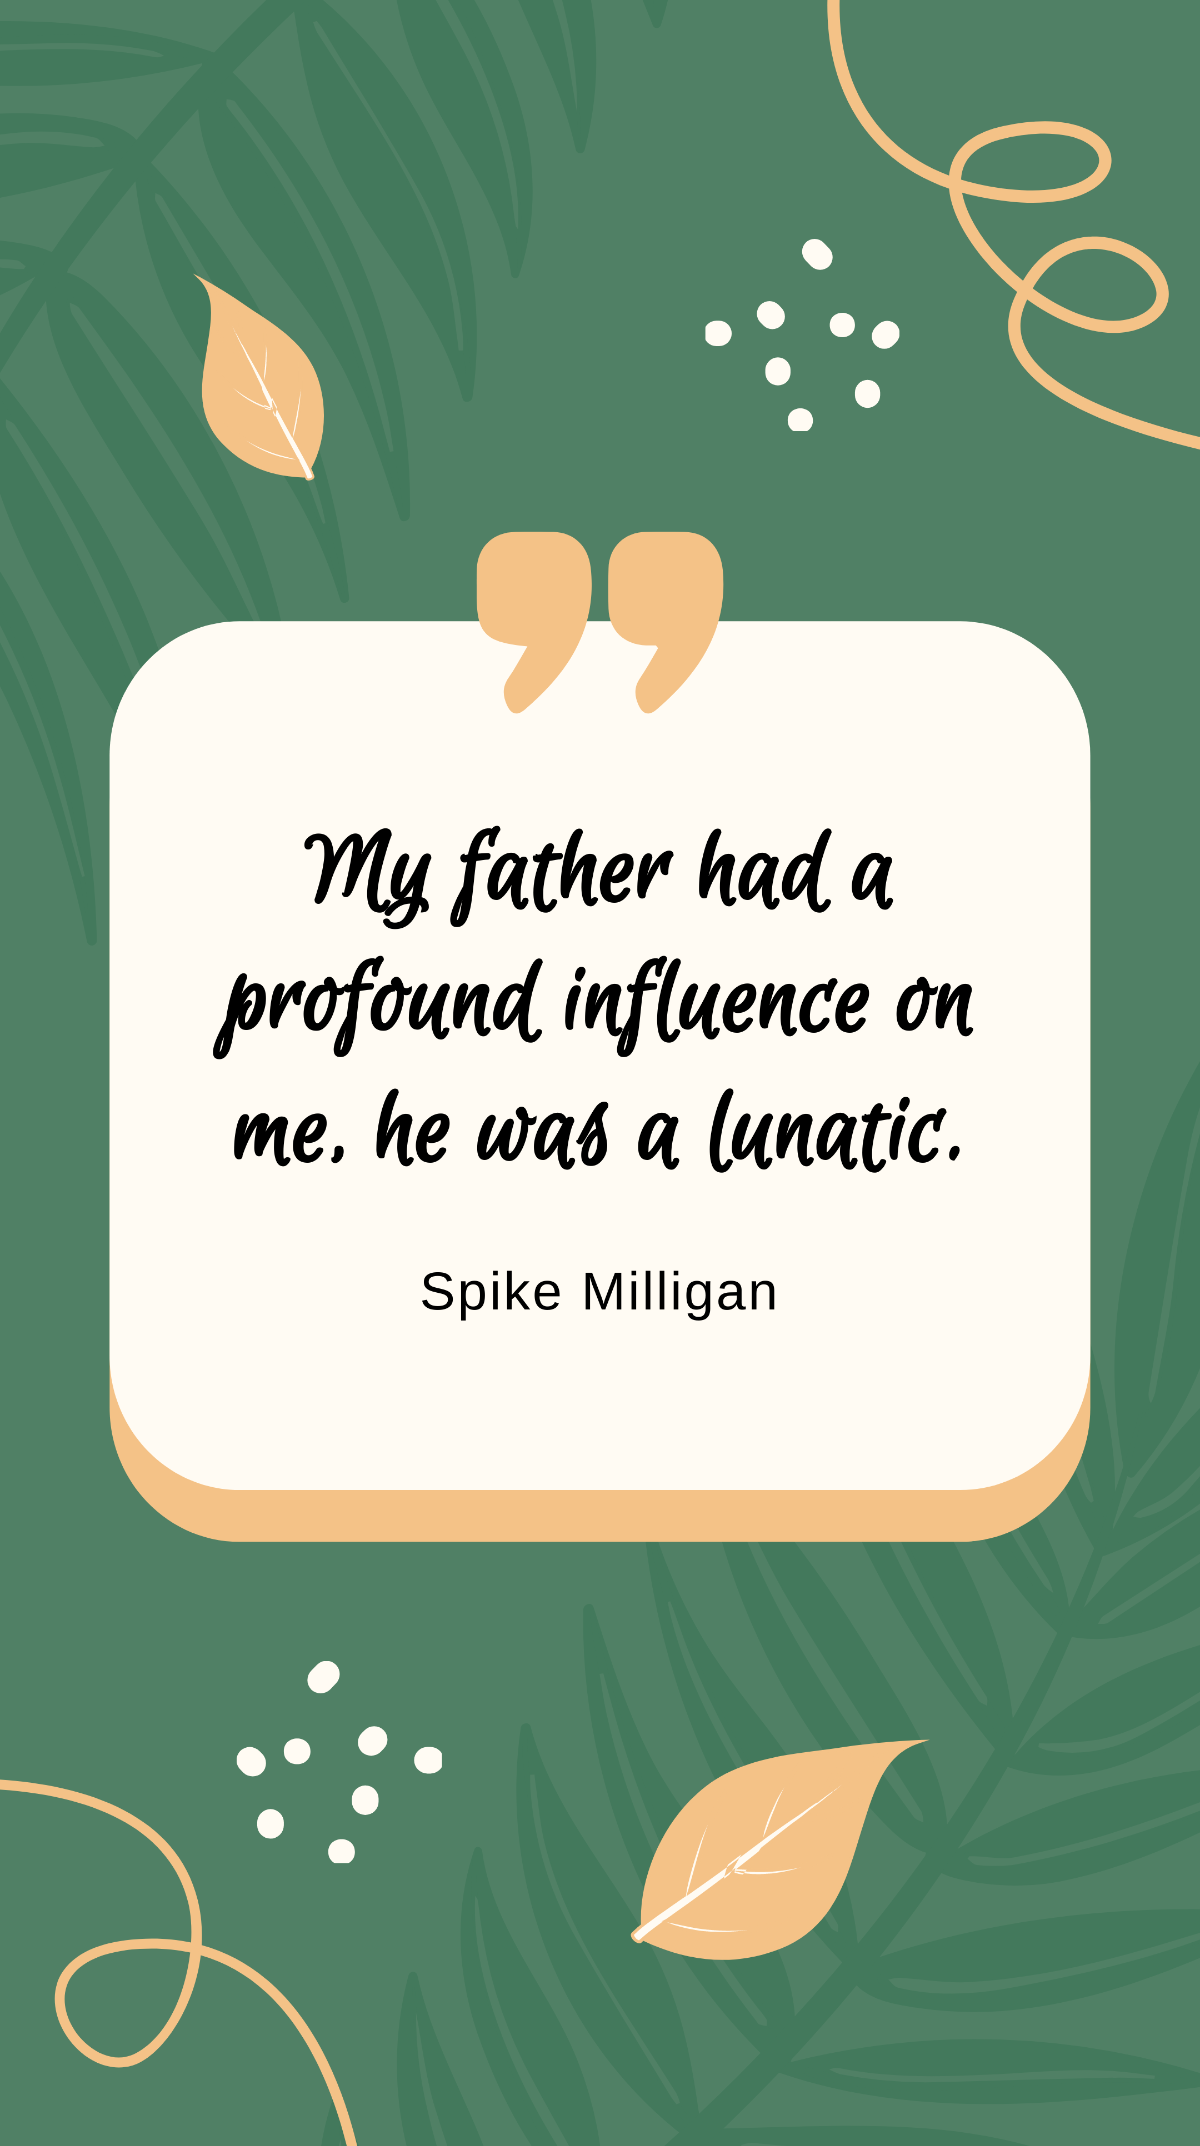 Spike Milligan - “My father had a profound influence on me, he was a lunatic.”  Template